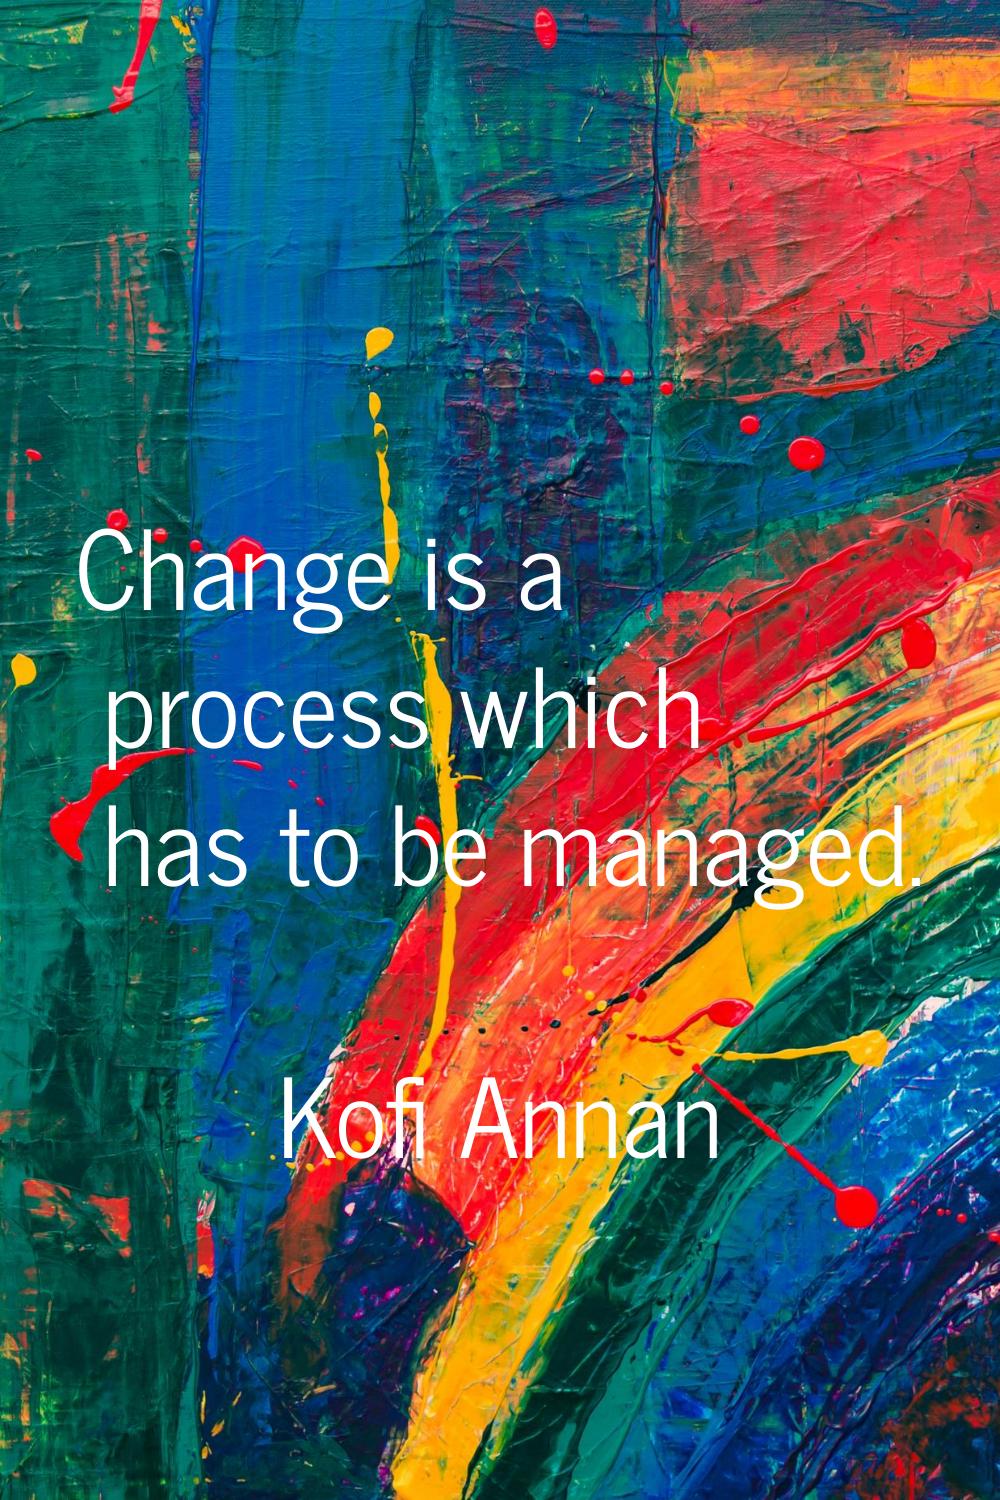 Change is a process which has to be managed.